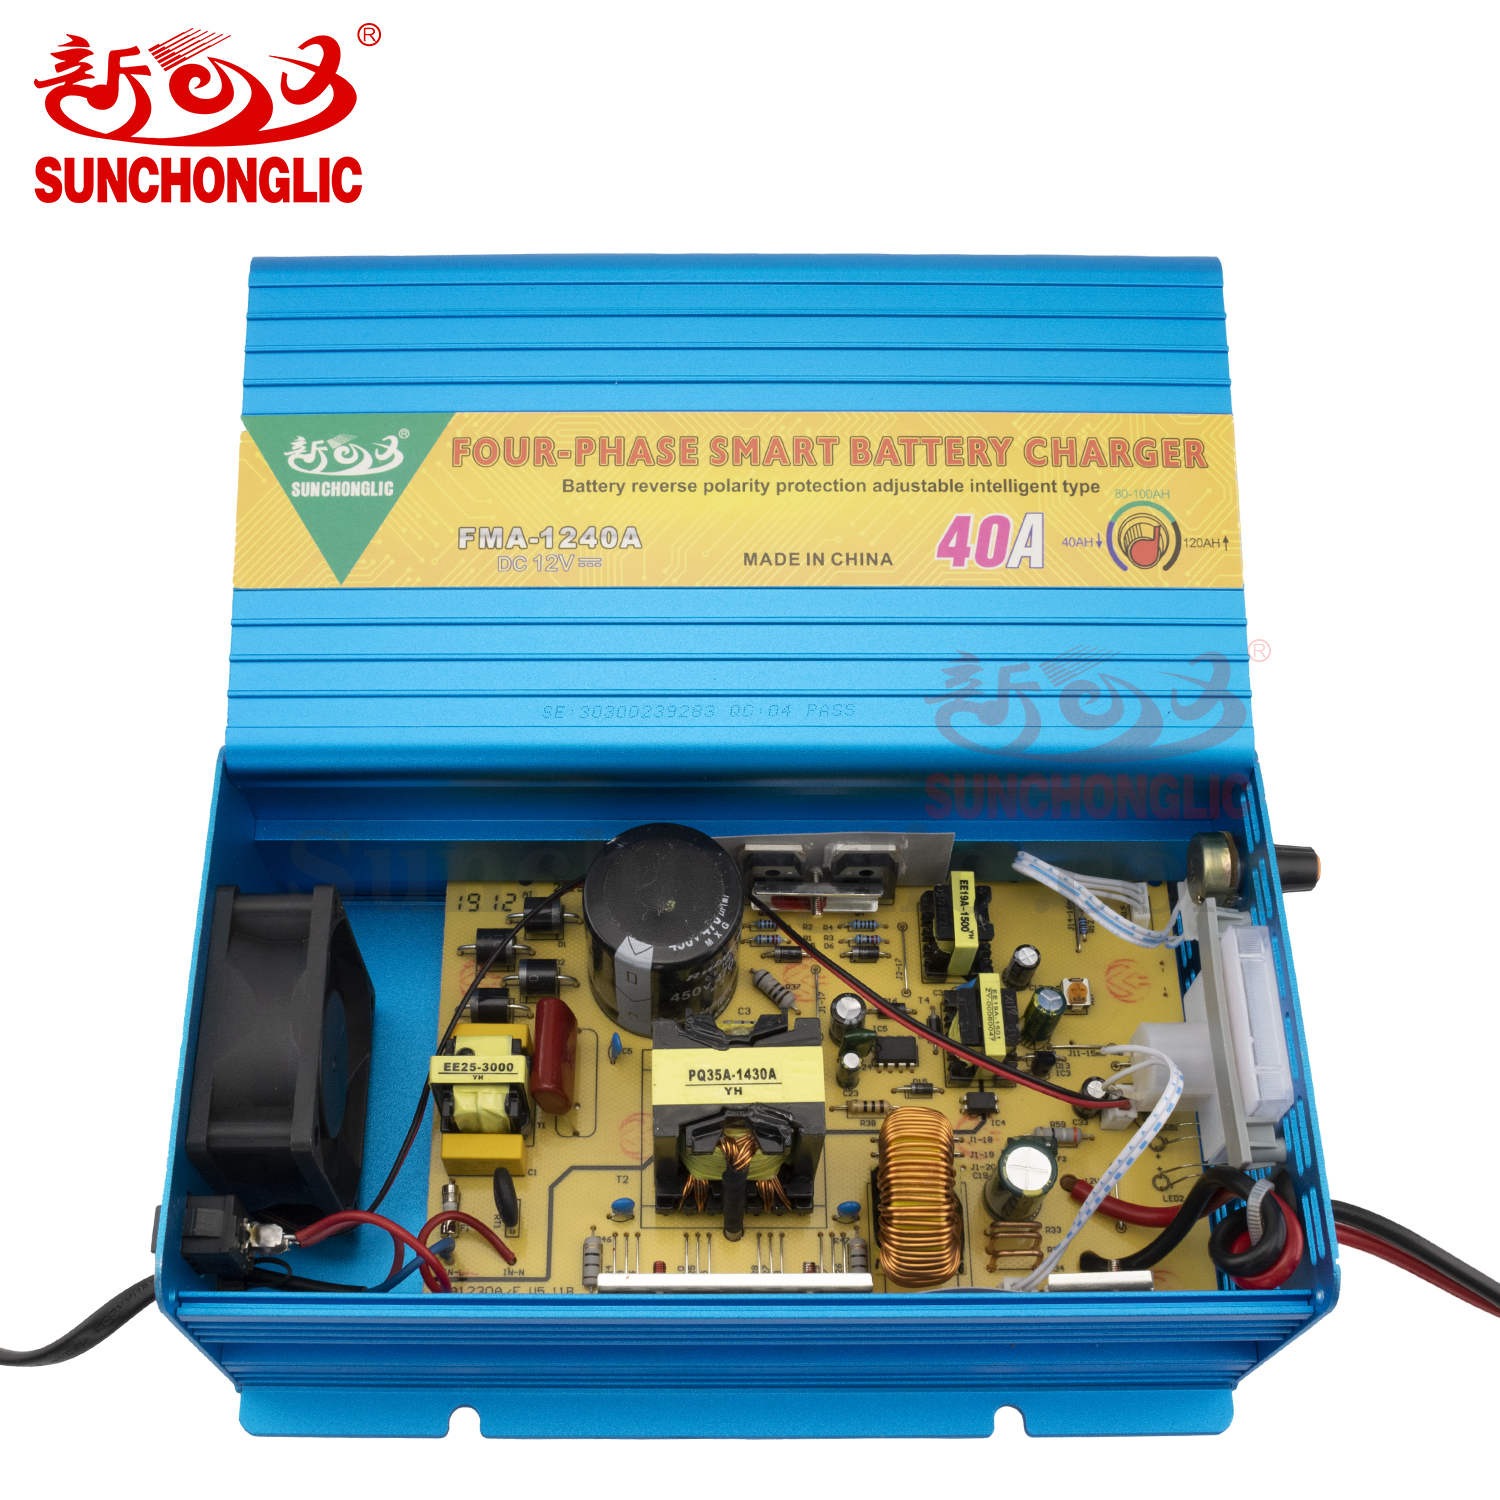 AGM/GEL Battery Charger - FMA-1240A